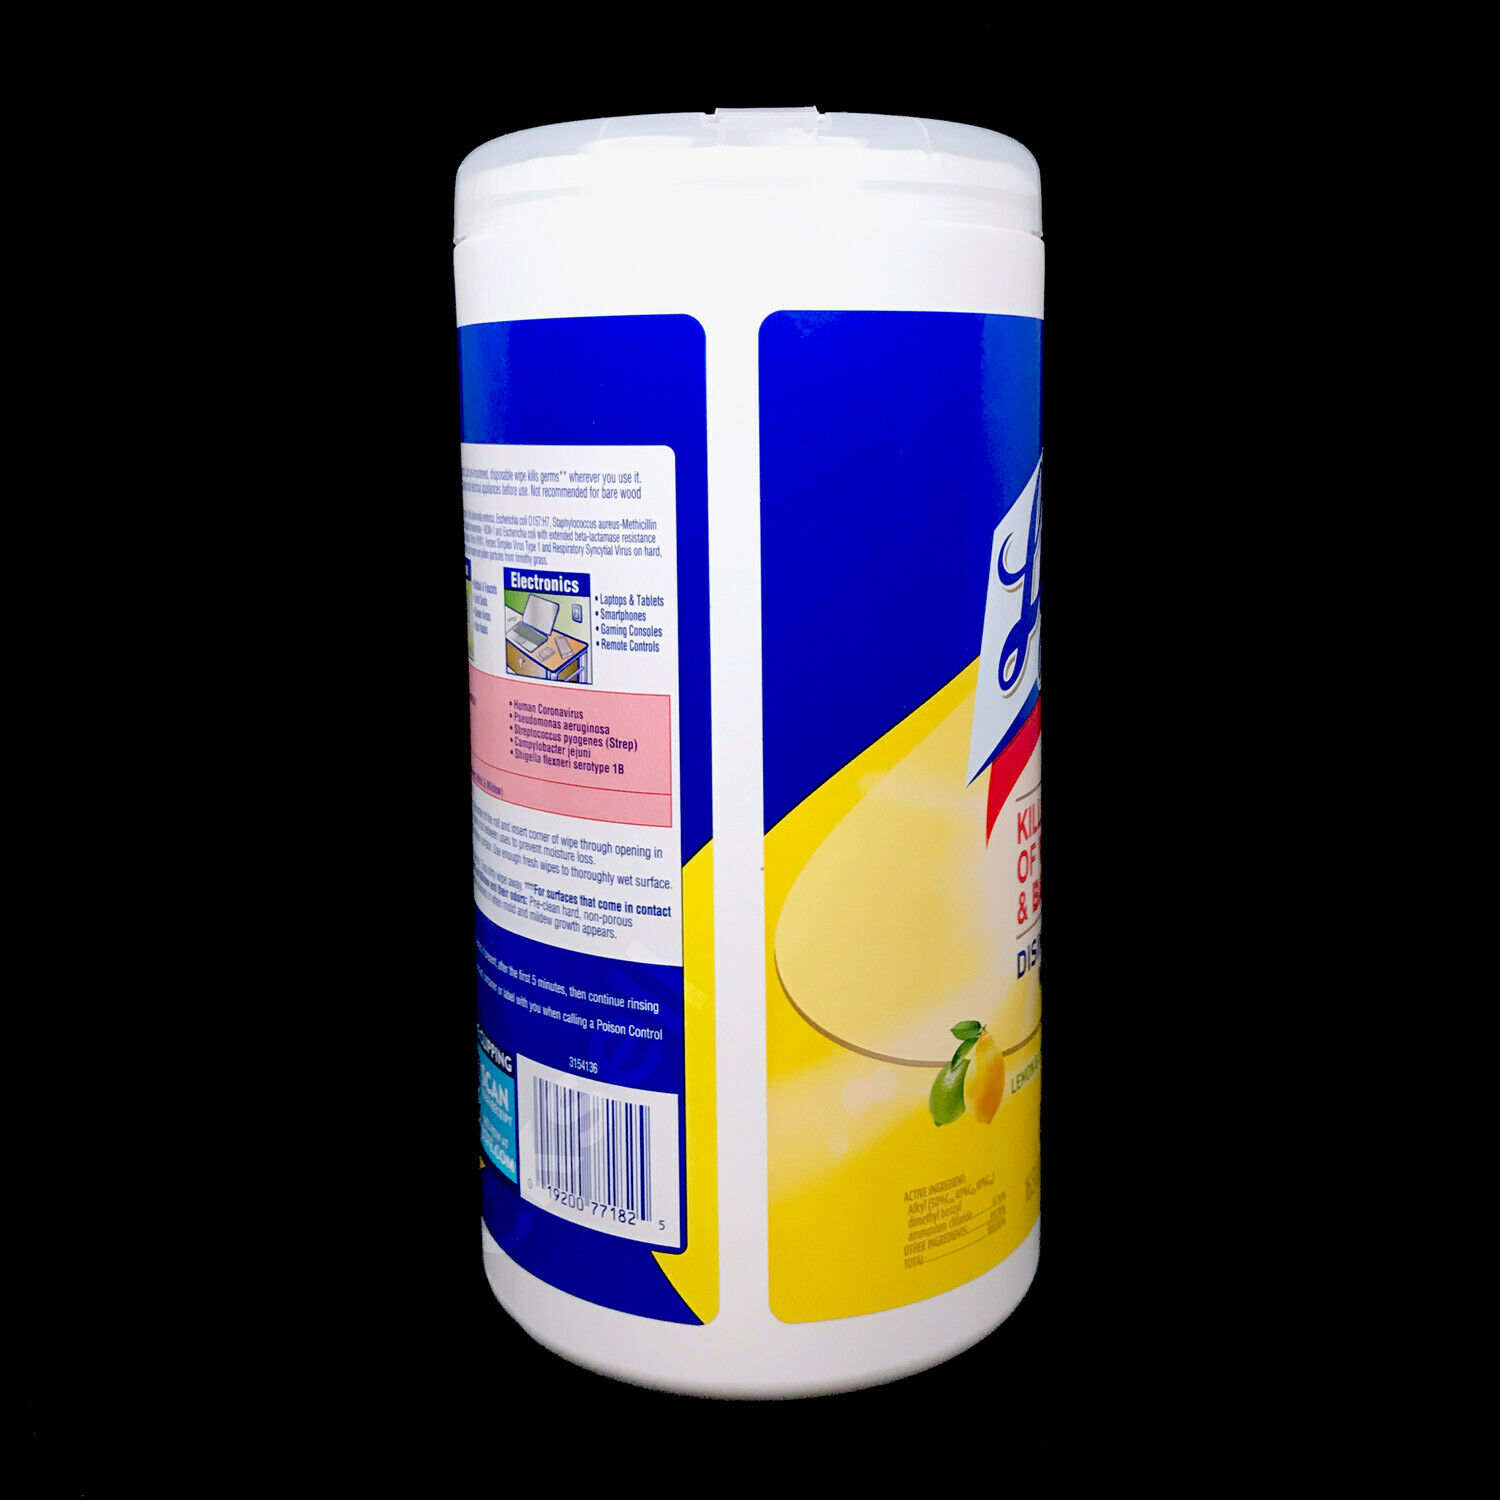 Lysol Disinfecting Wipes 80 count lemon & lime blossom scent